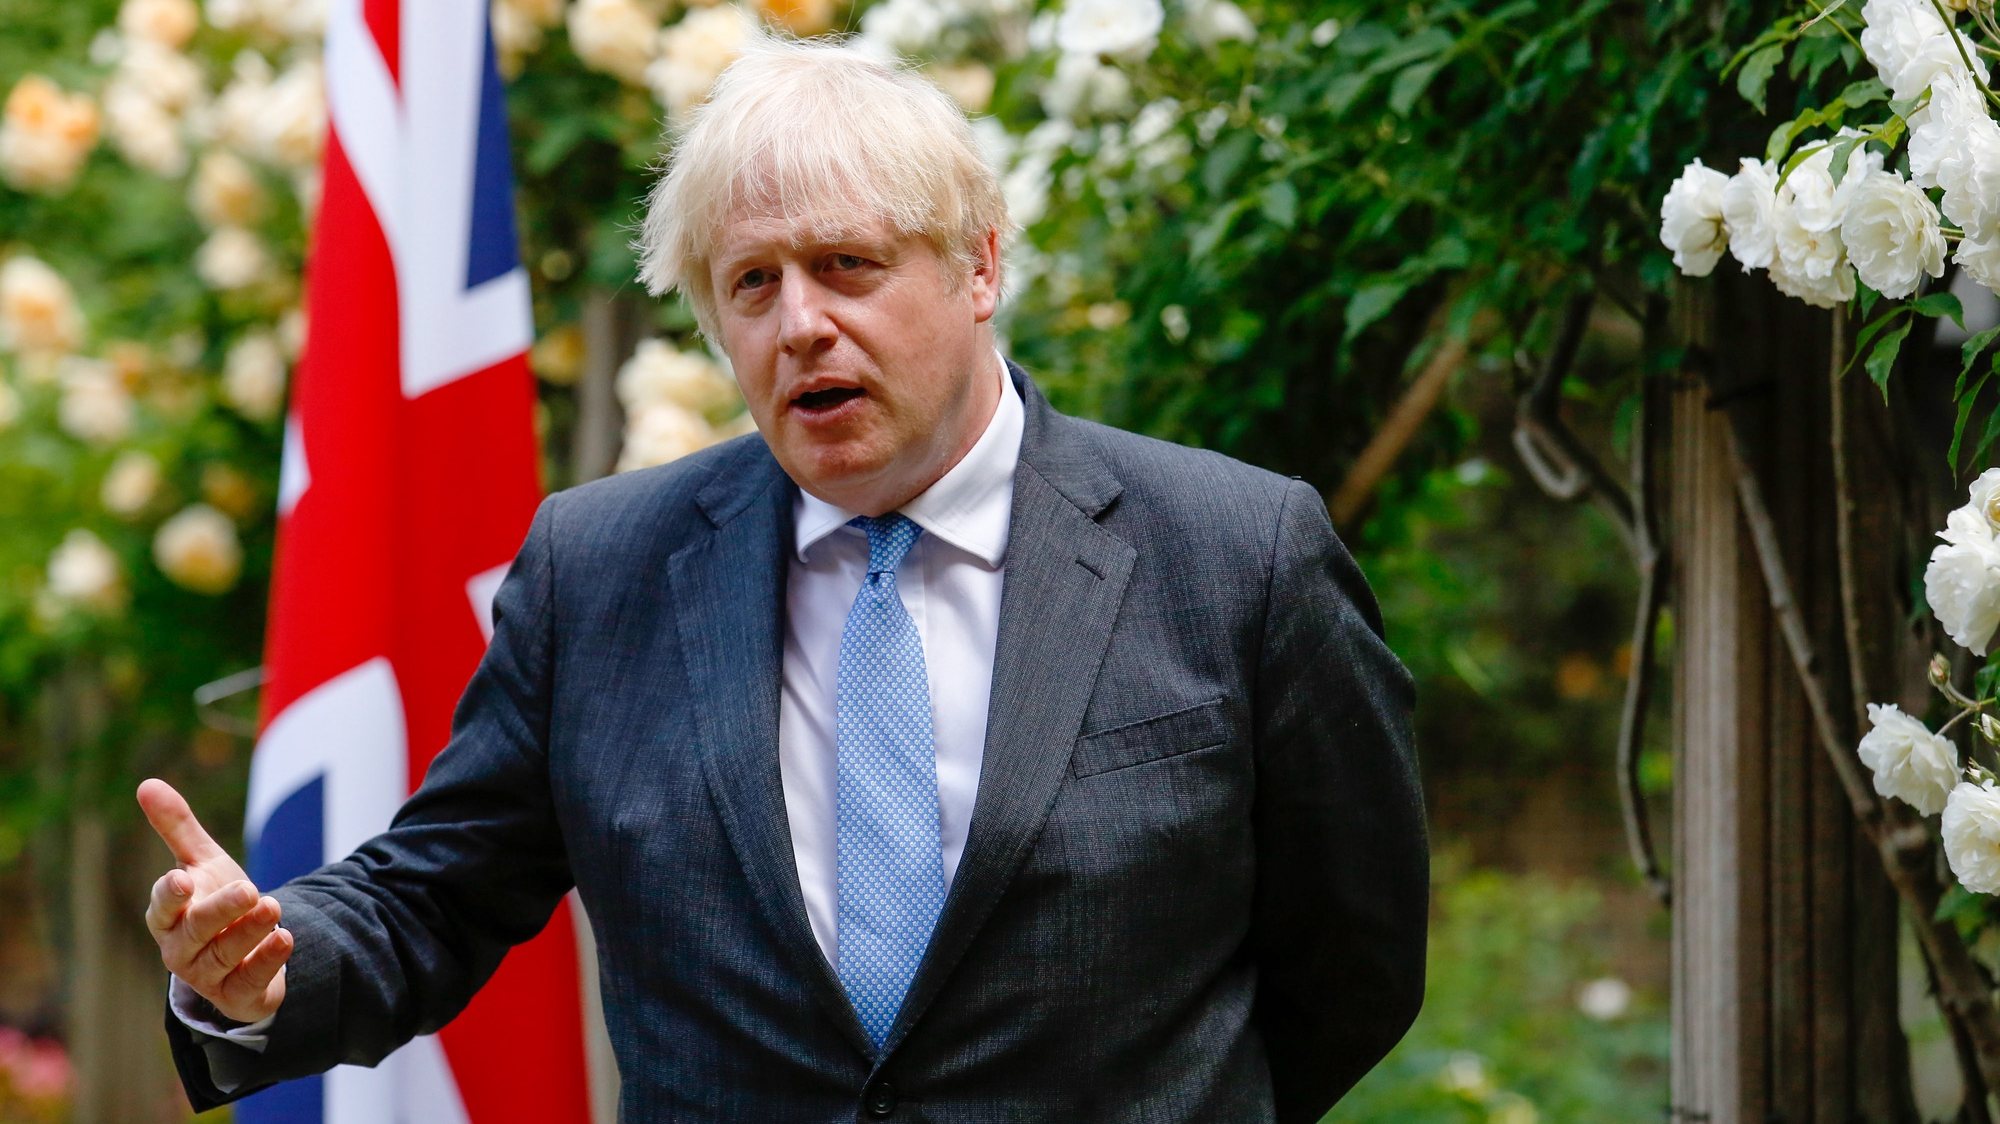 epa09272673 British Prime Minister Boris Johnson, gestures during a joint news conference with Australian counterpart Scott Morrison, during their bilateral meeting in the garden of number 10 Downing Street in London, Britain, 15 June 2021. The U.K. is set to announce the broad terms of a free-trade deal with Australia on 15 June, its latest post-Brexit accord as Prime Minister Boris Johnson seeks to expand commerce beyond the European Union.  EPA/Luke MacGregor / POOL